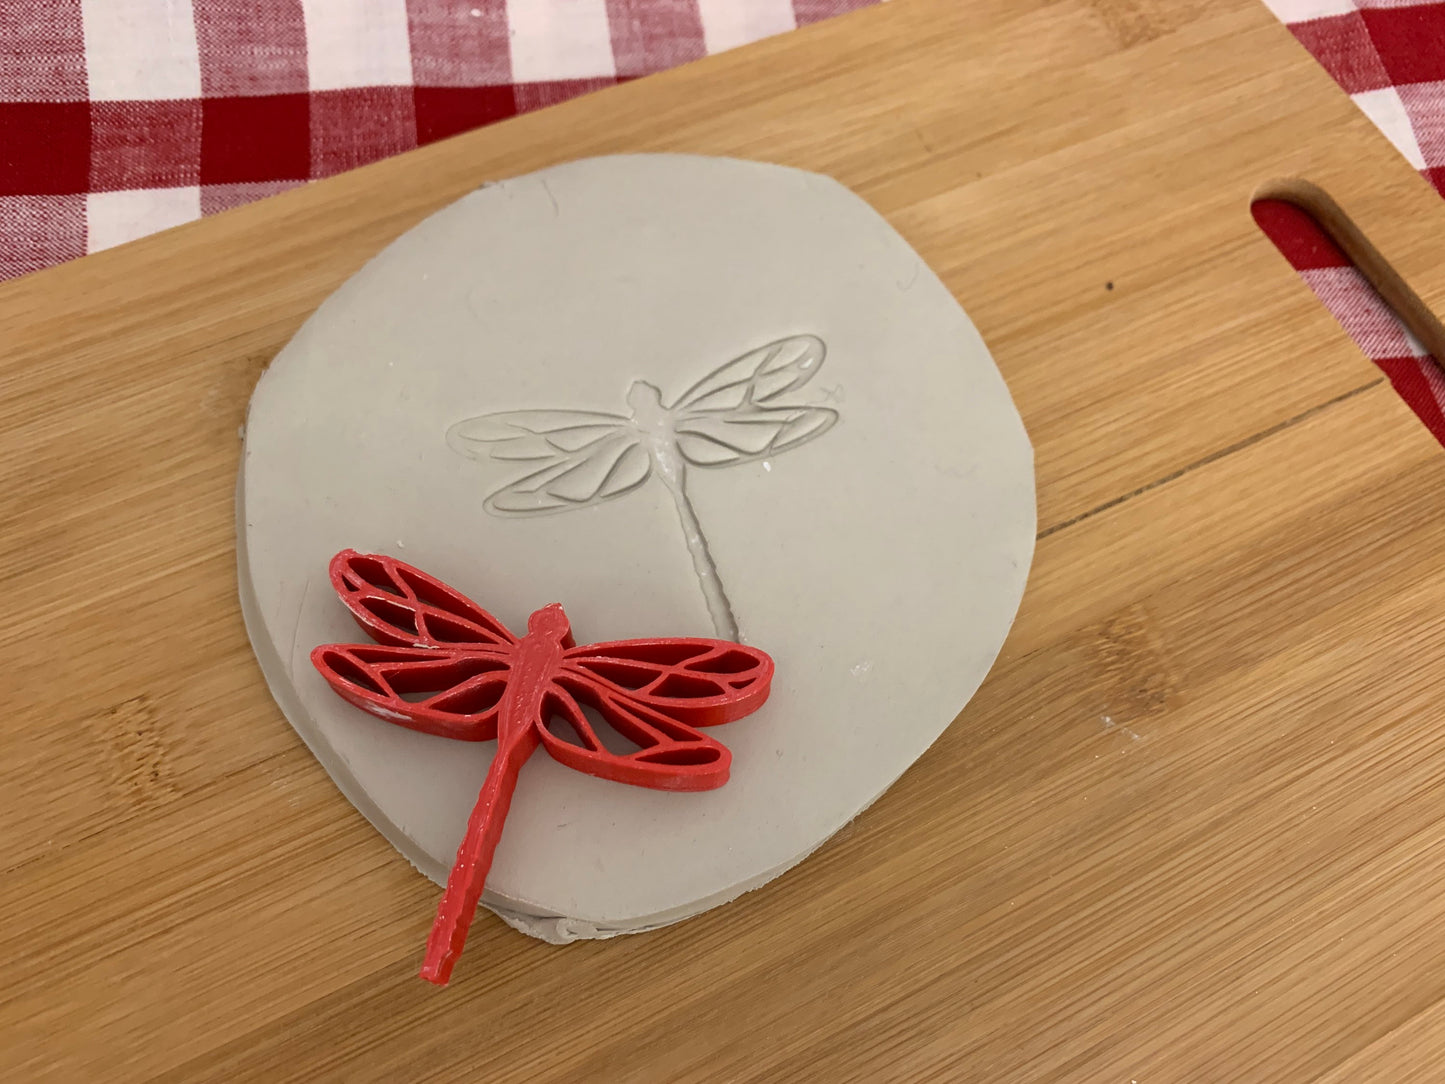 Pottery Stamp, dragonfly design - multiple sizes